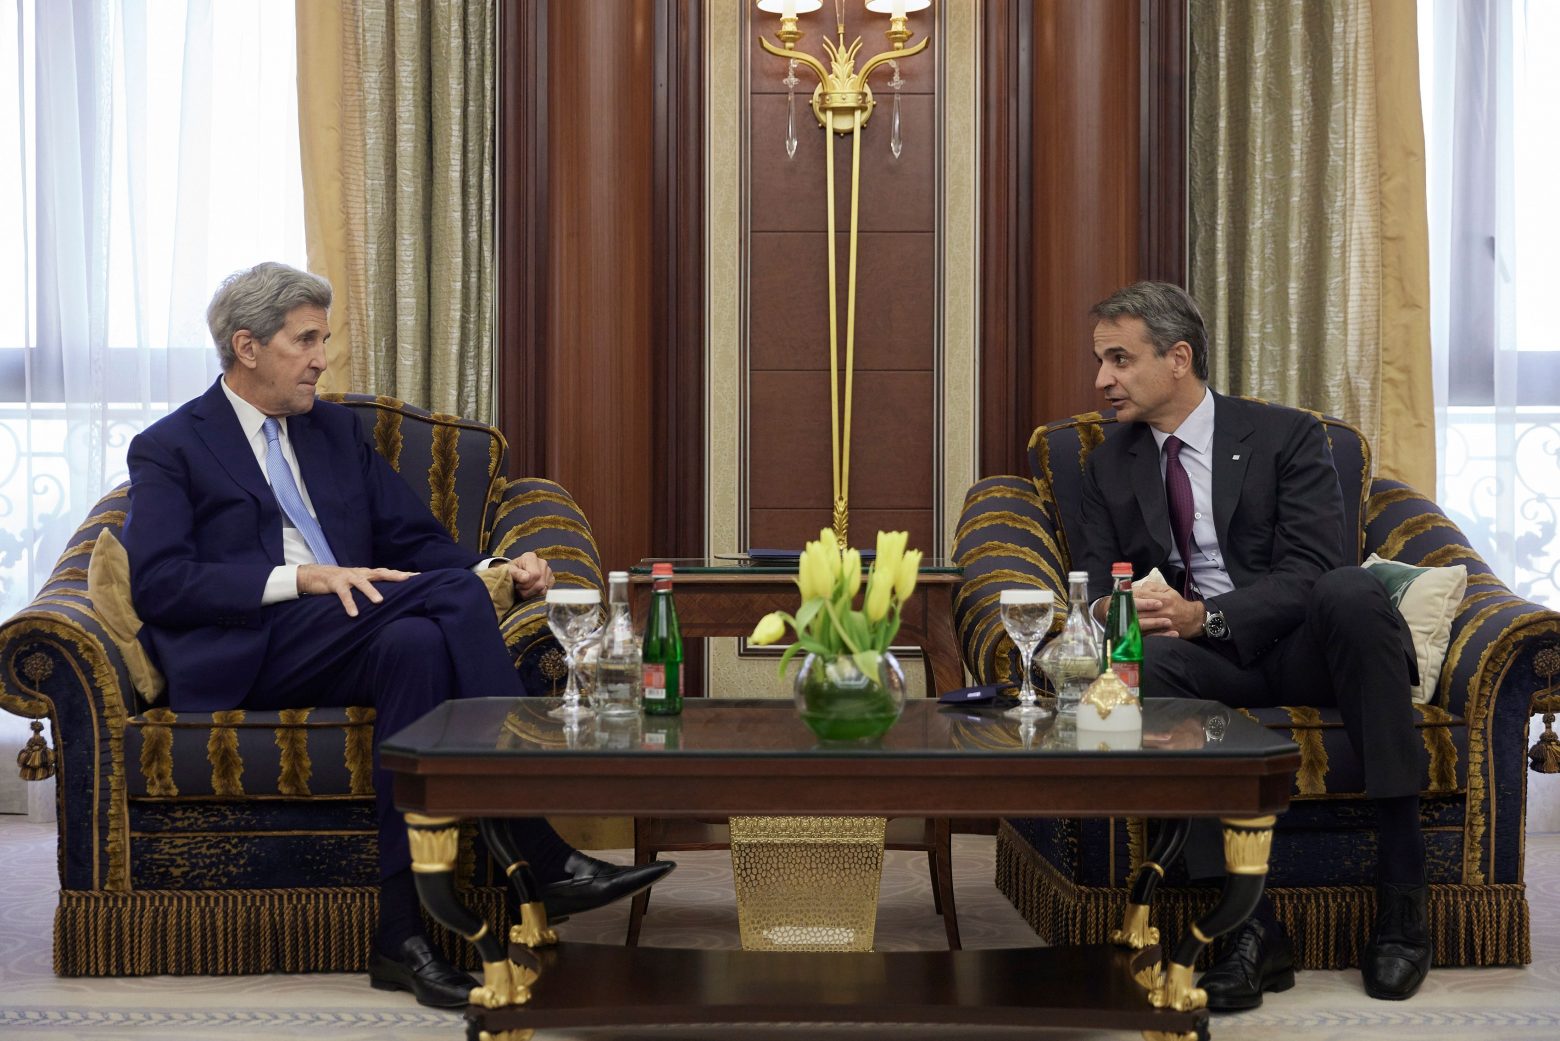 PM briefs US special rep for climate John Kerry on sidelines of Mideast Green Initiative summit in Riyadh